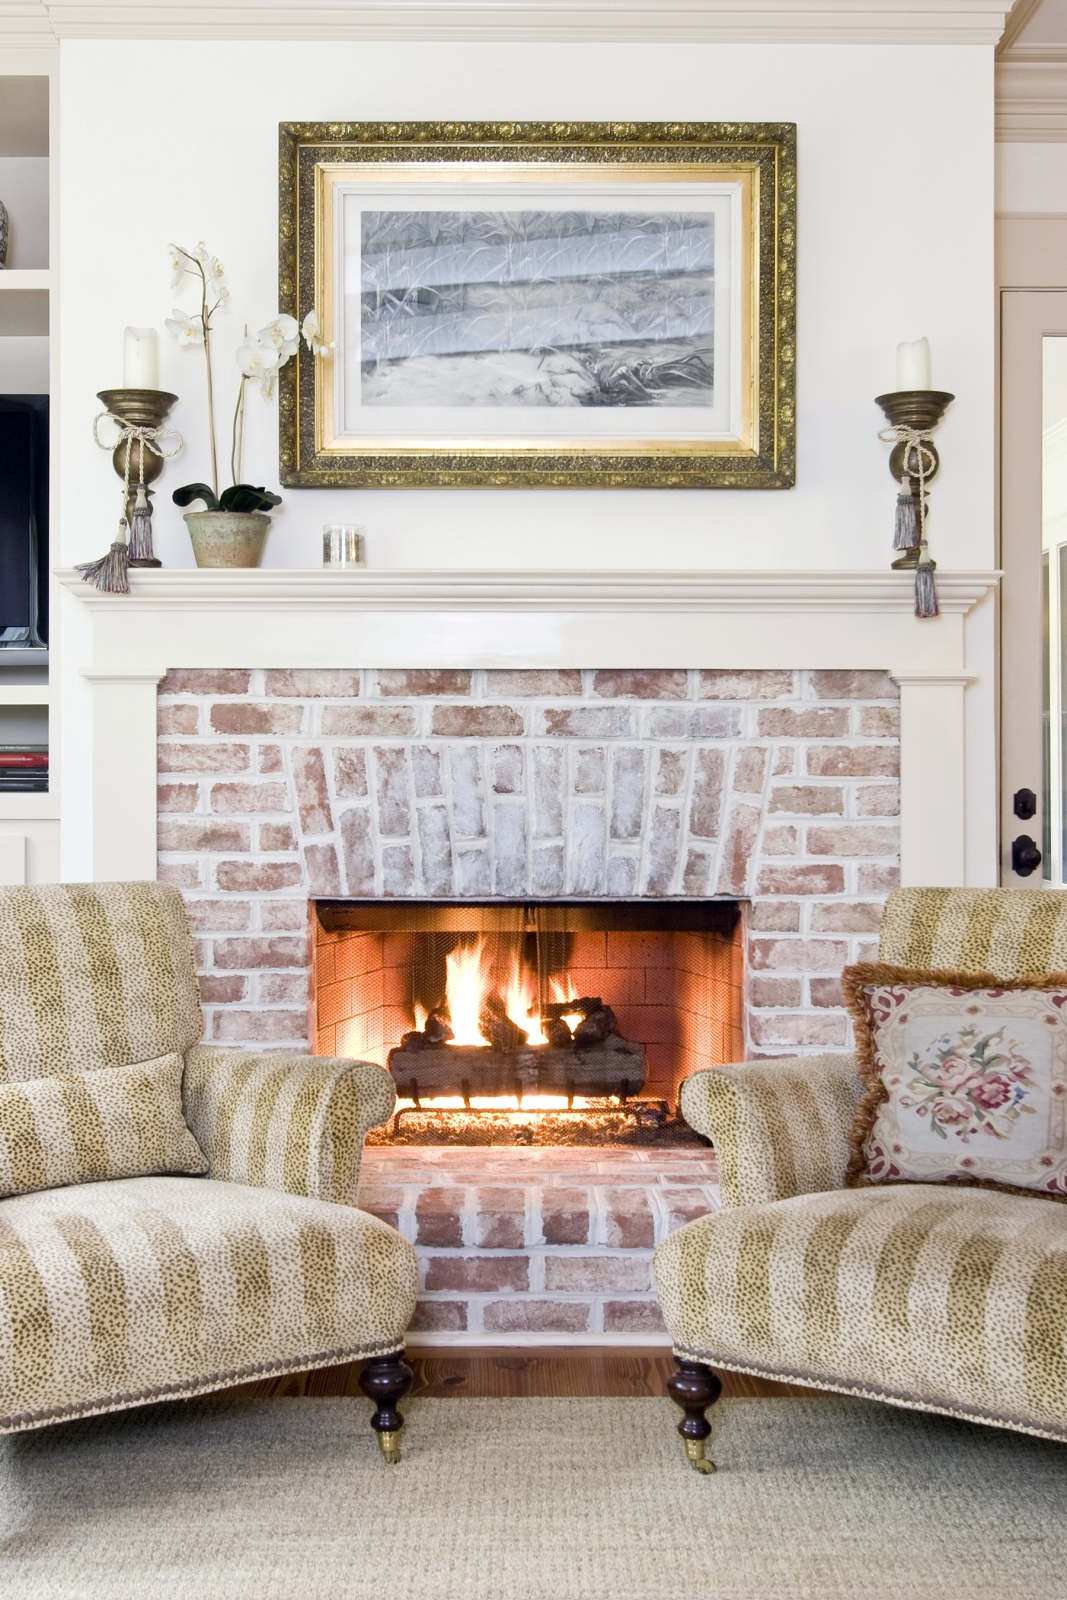 Pale Stone Fireplaces And White Mantel, Gray Brick Fireplace With White Mantel